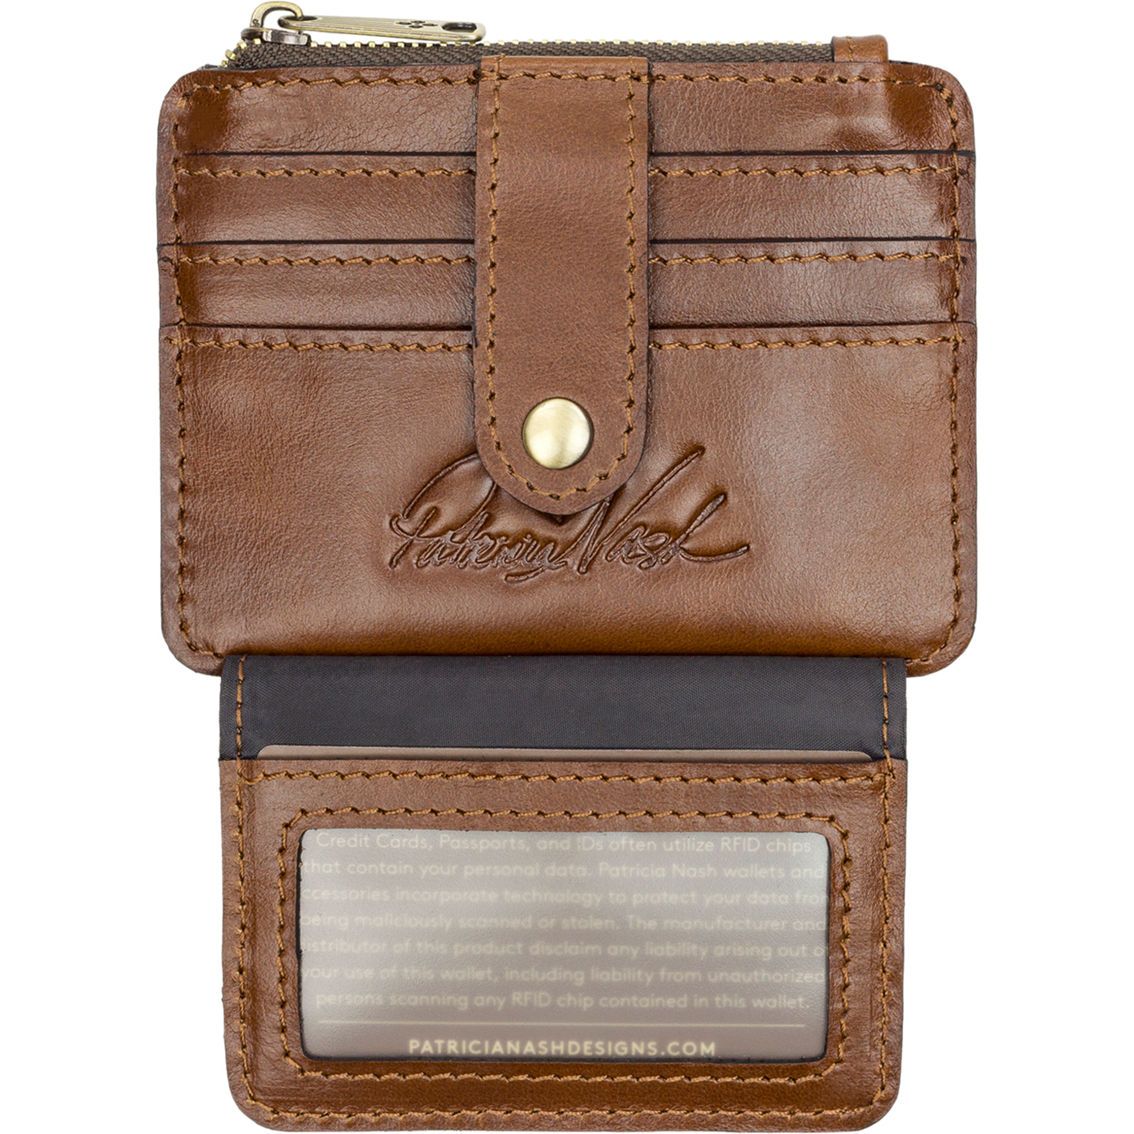 Patricia Nash Cassis ID Wallet - Image 3 of 4